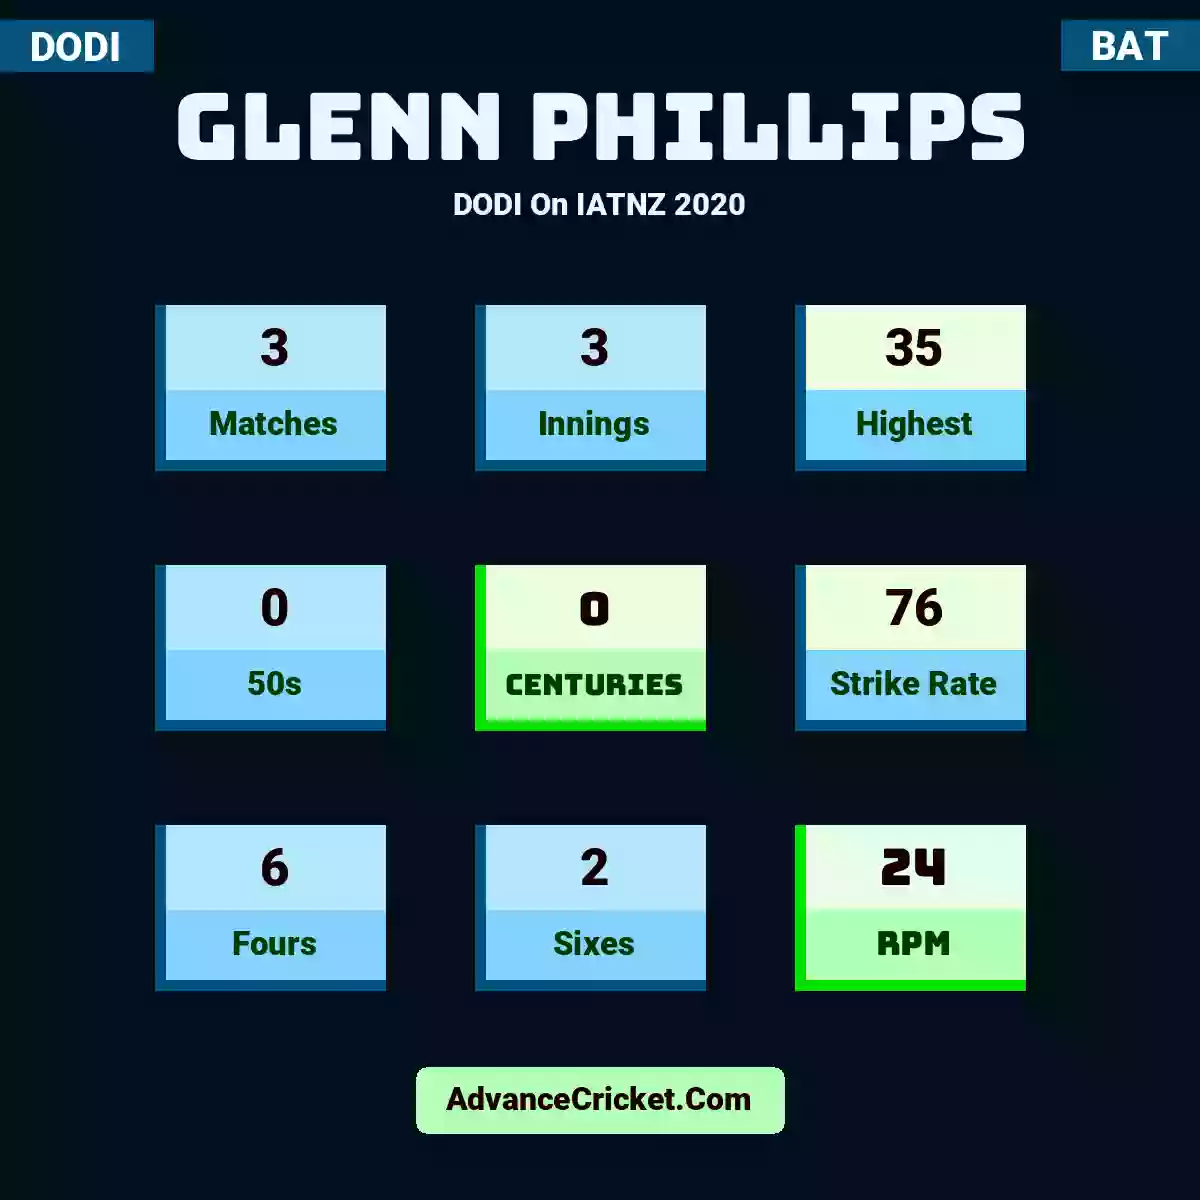 Glenn Phillips DODI  On IATNZ 2020, Glenn Phillips played 3 matches, scored 35 runs as highest, 0 half-centuries, and 0 centuries, with a strike rate of 76. G.Phillips hit 6 fours and 2 sixes, with an RPM of 24.